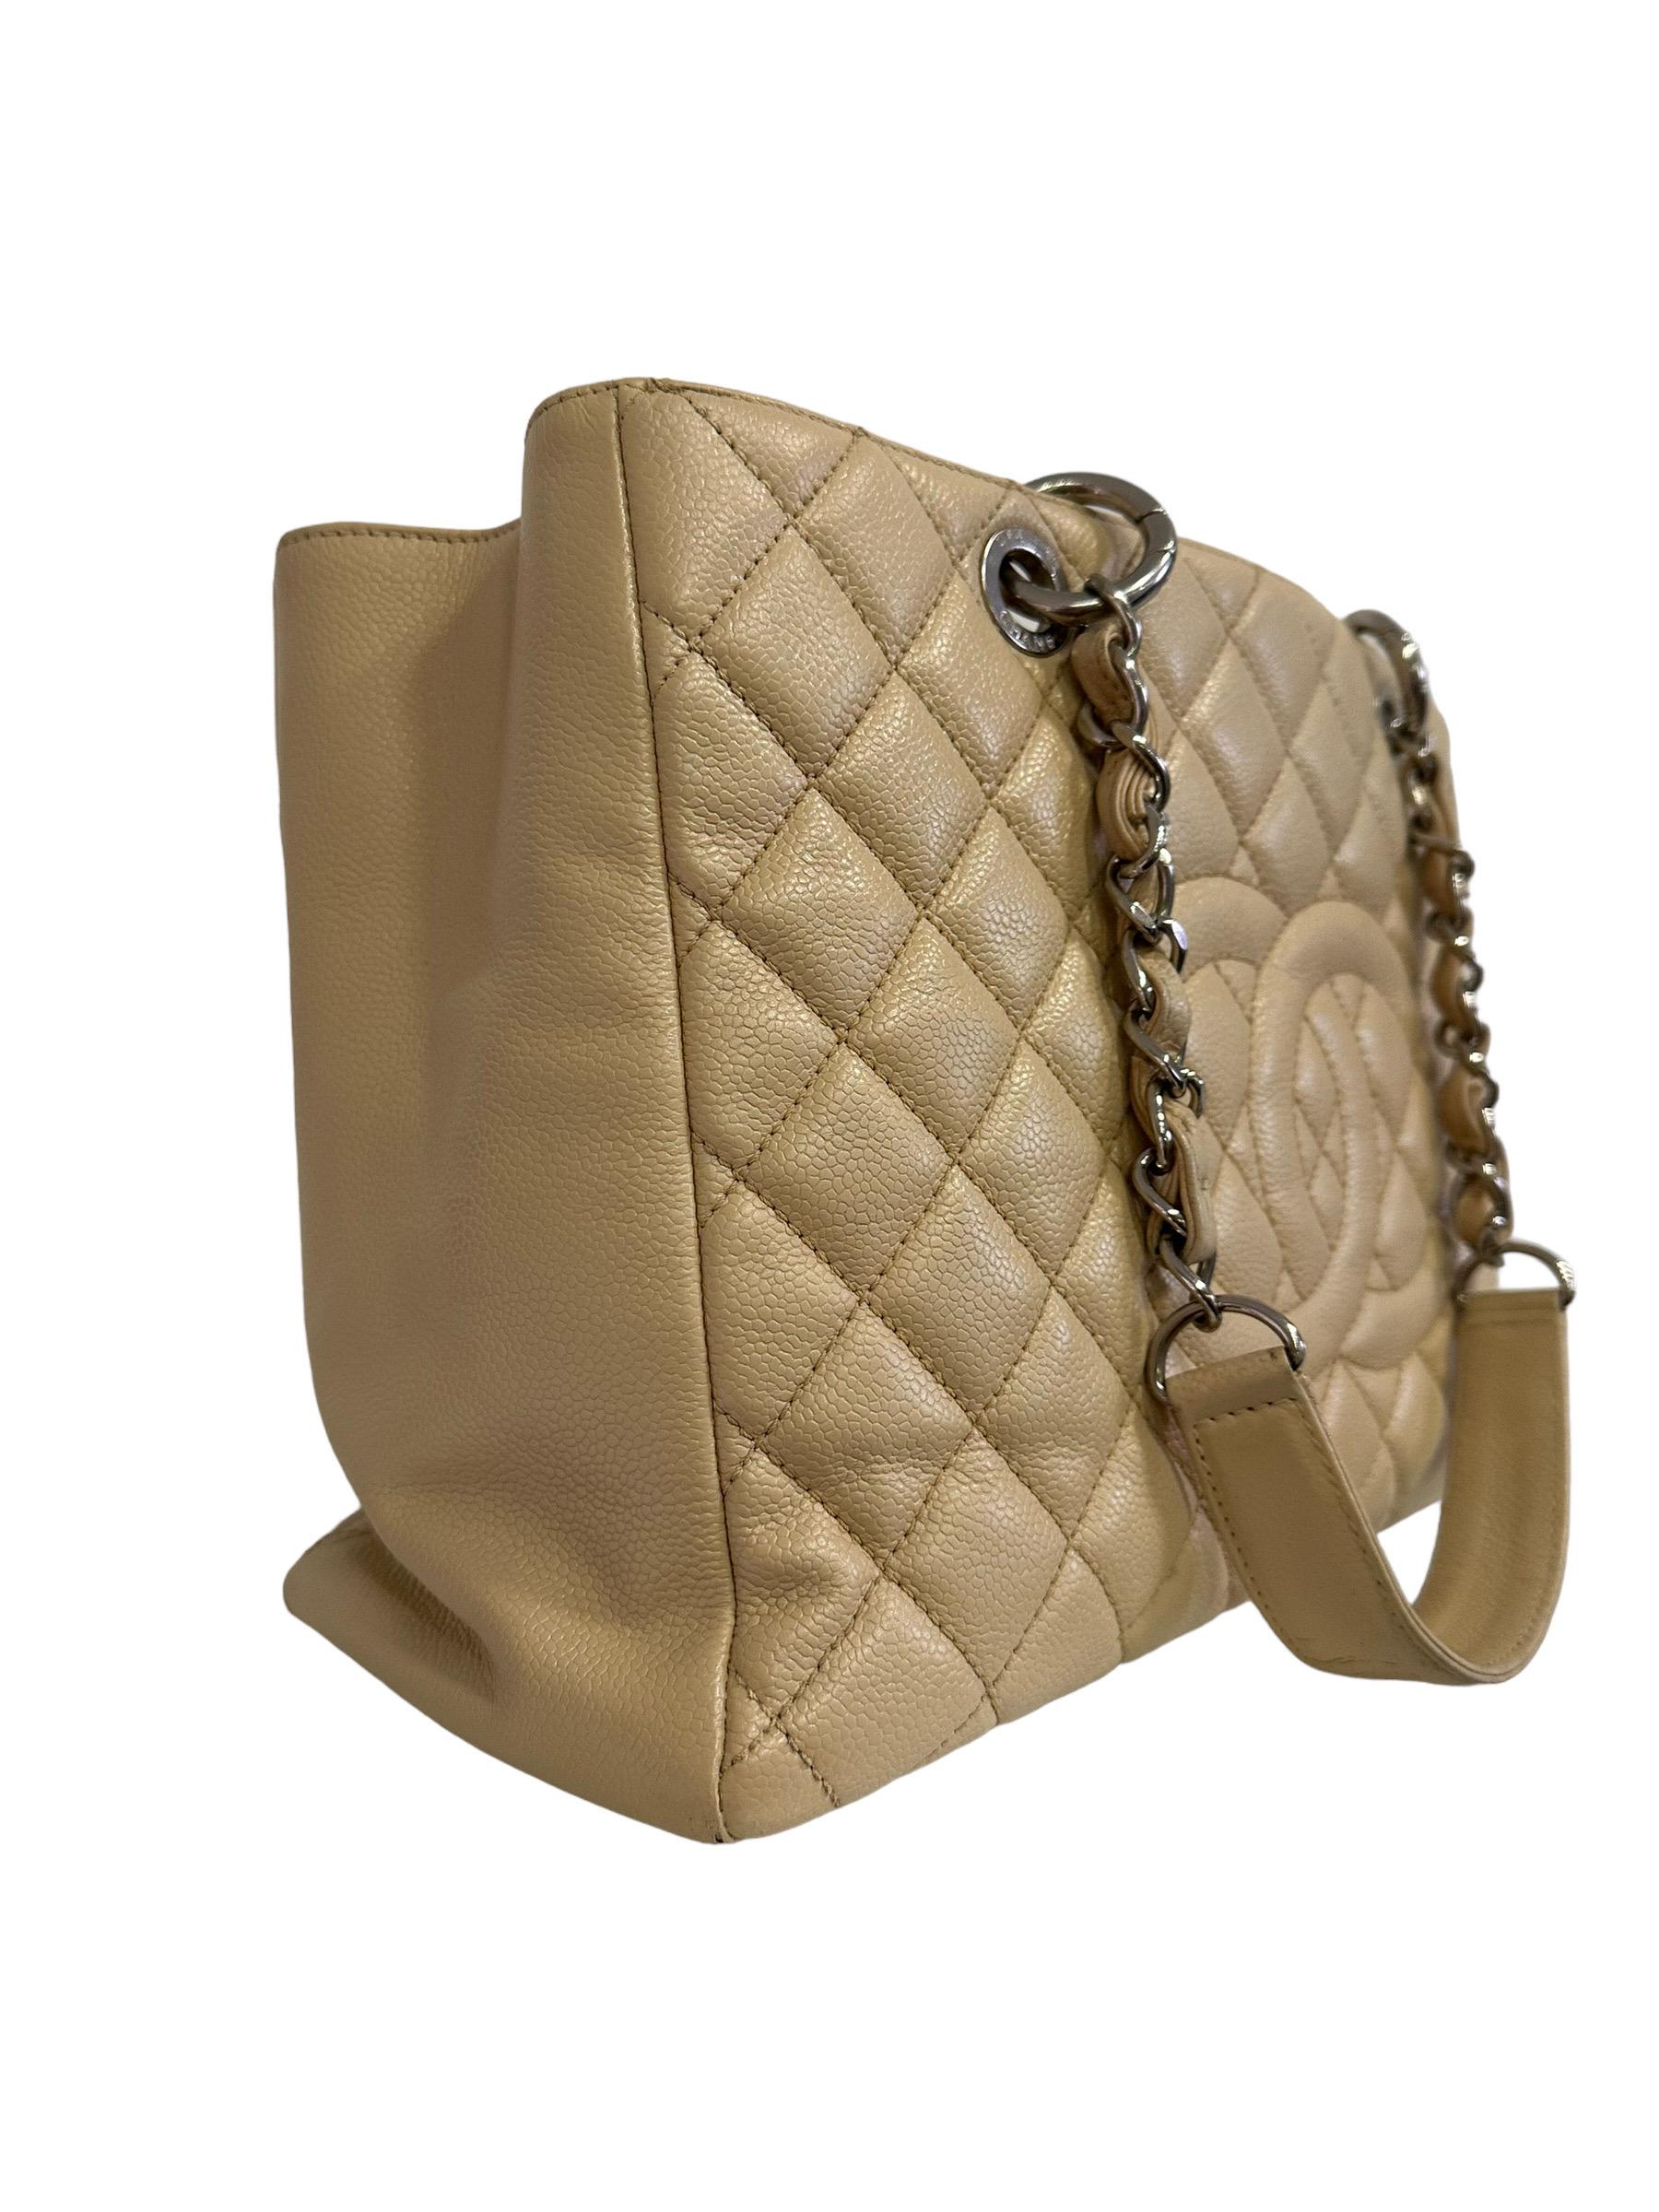 Chanel signed bag, GST model, made of beige quilted leather with golden hardware. It has a large central opening and two non-adjustable intertwined leather and chain handles. Internally lined in beige canva, very roomy, it has two large pockets, one